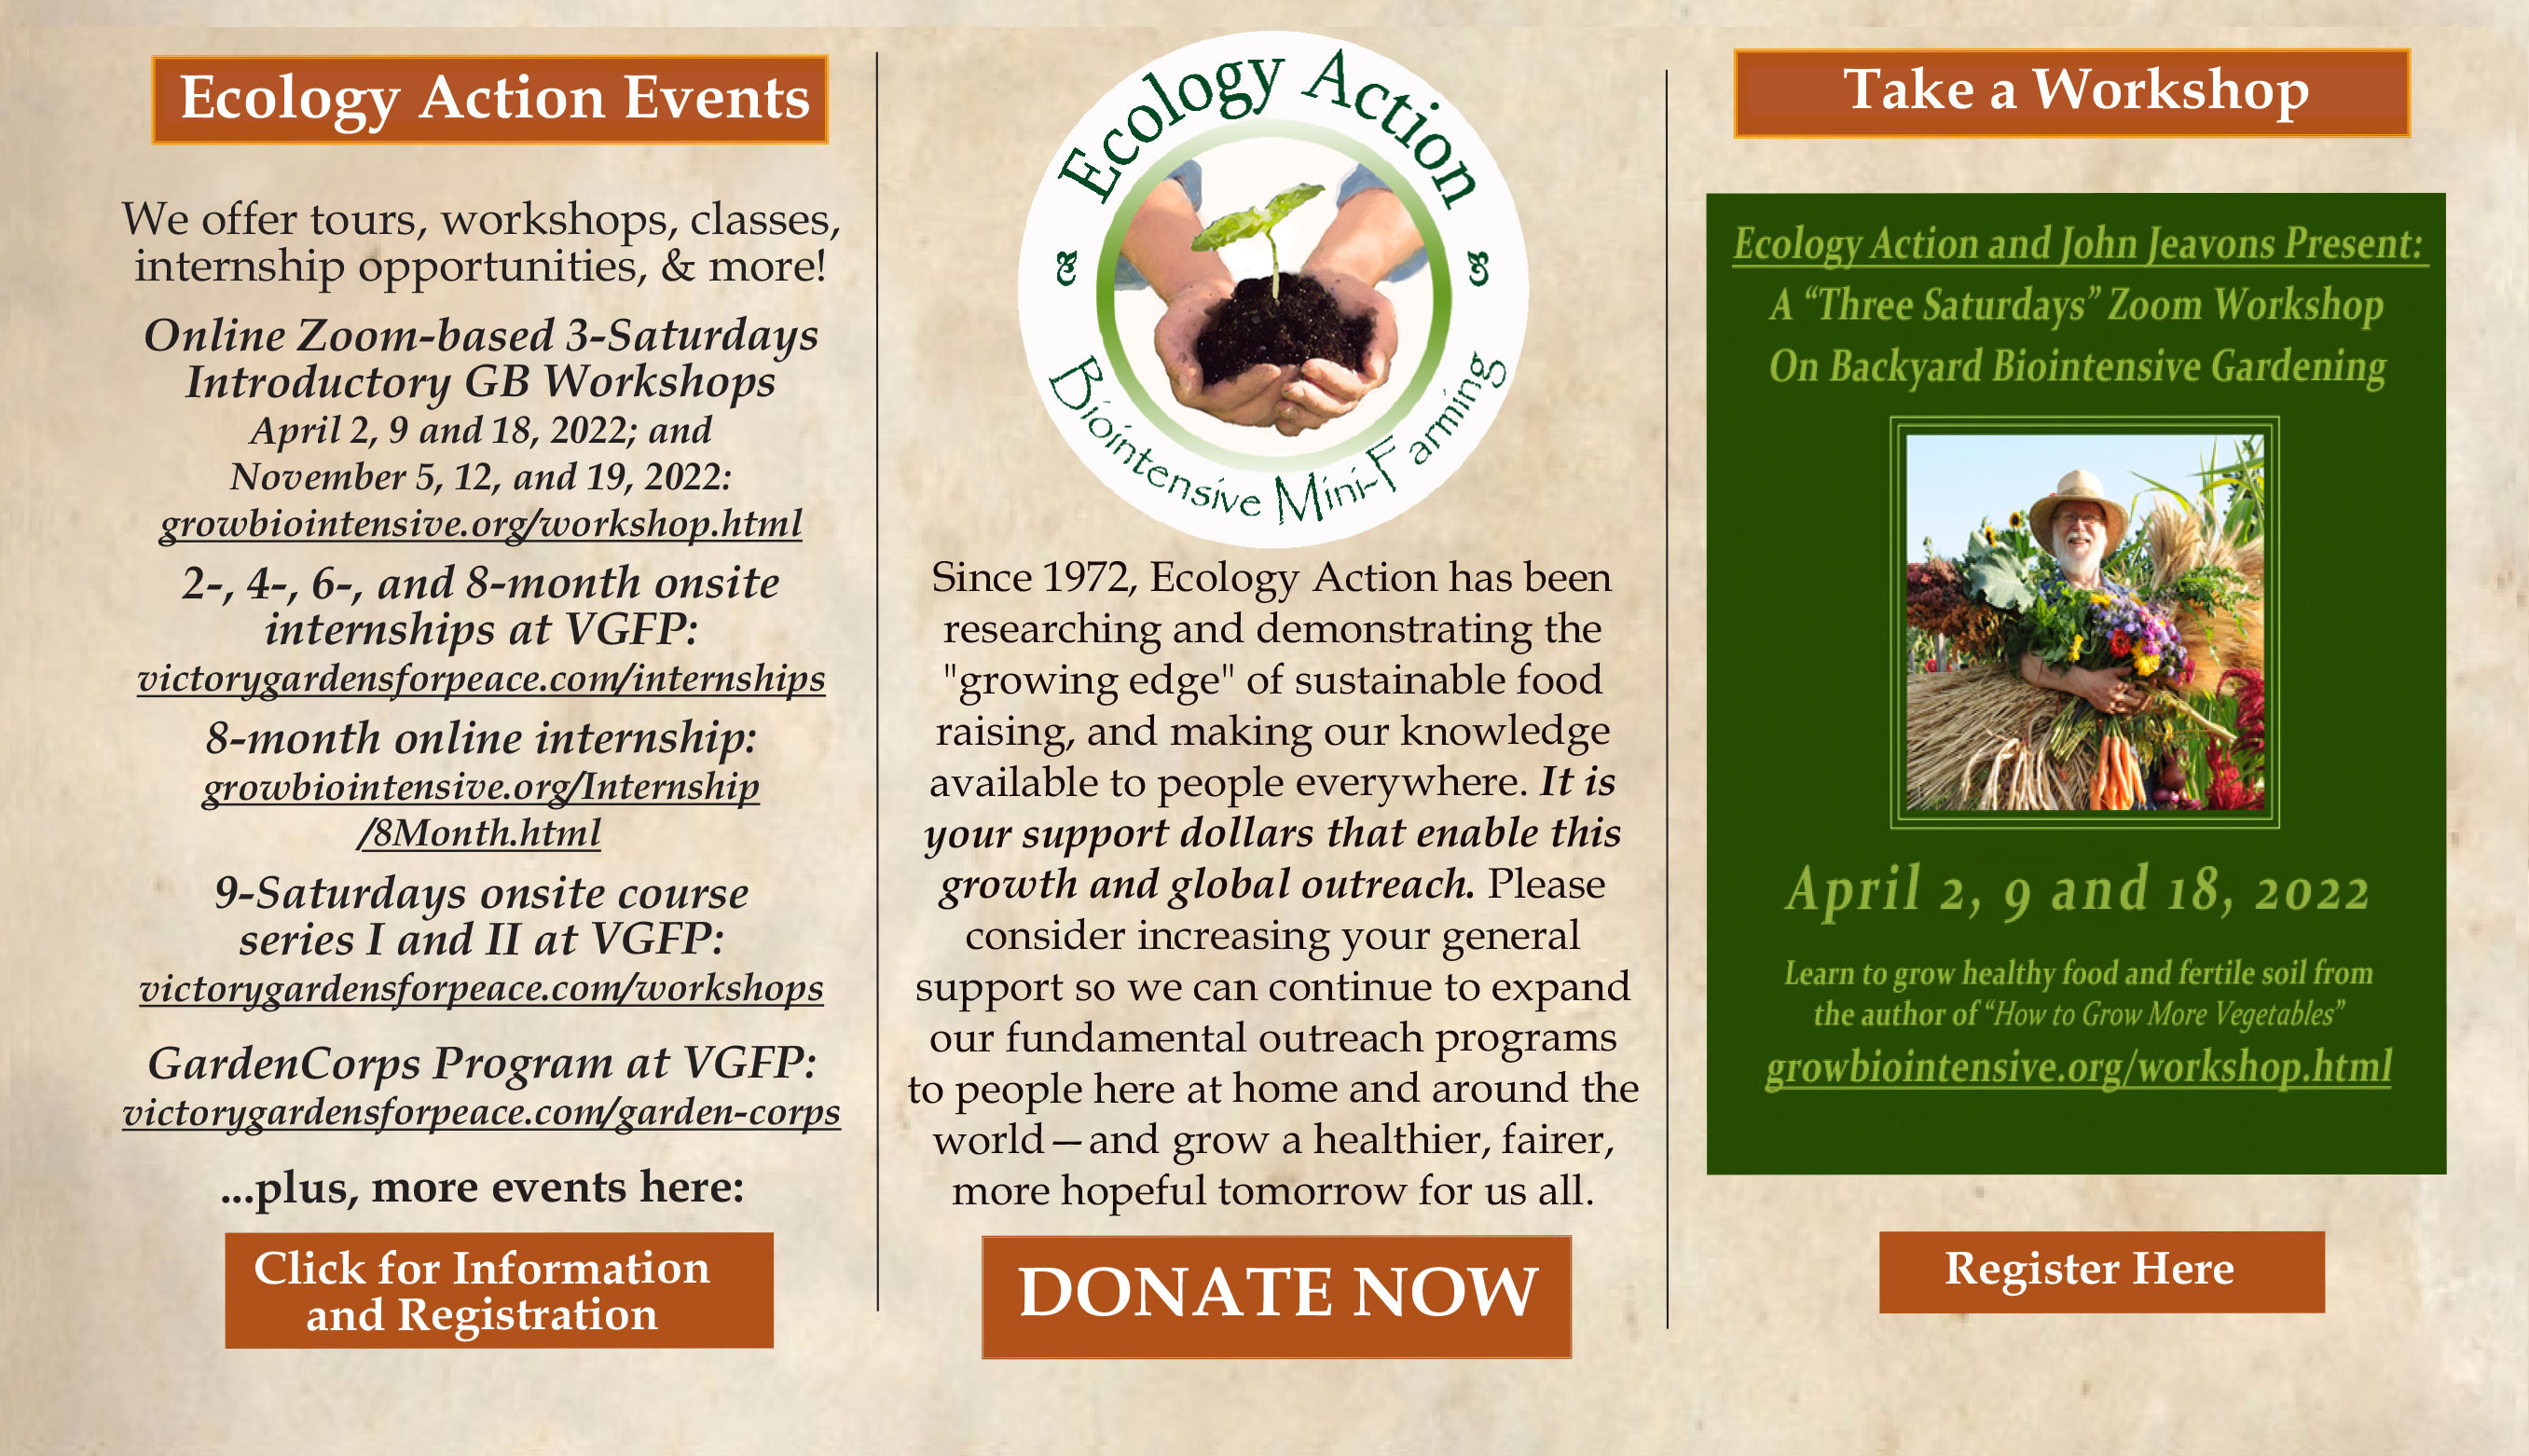 ______
48 Years.
152 Countries.
Millions of people educated.
Millions of garden beds created.
Billions of pounds of fertile soil grown.
...and we're just getting started.
Grow Hope. Grow Abundance.
GROW BIOINTENSIVE!
Please donate to keep our work growing at home and around the world!
https://secure.growbiointensive.org/
___________________________________________
©2021 Ecology Action. All Rights Reserved.
---------------------------------------------------------------------